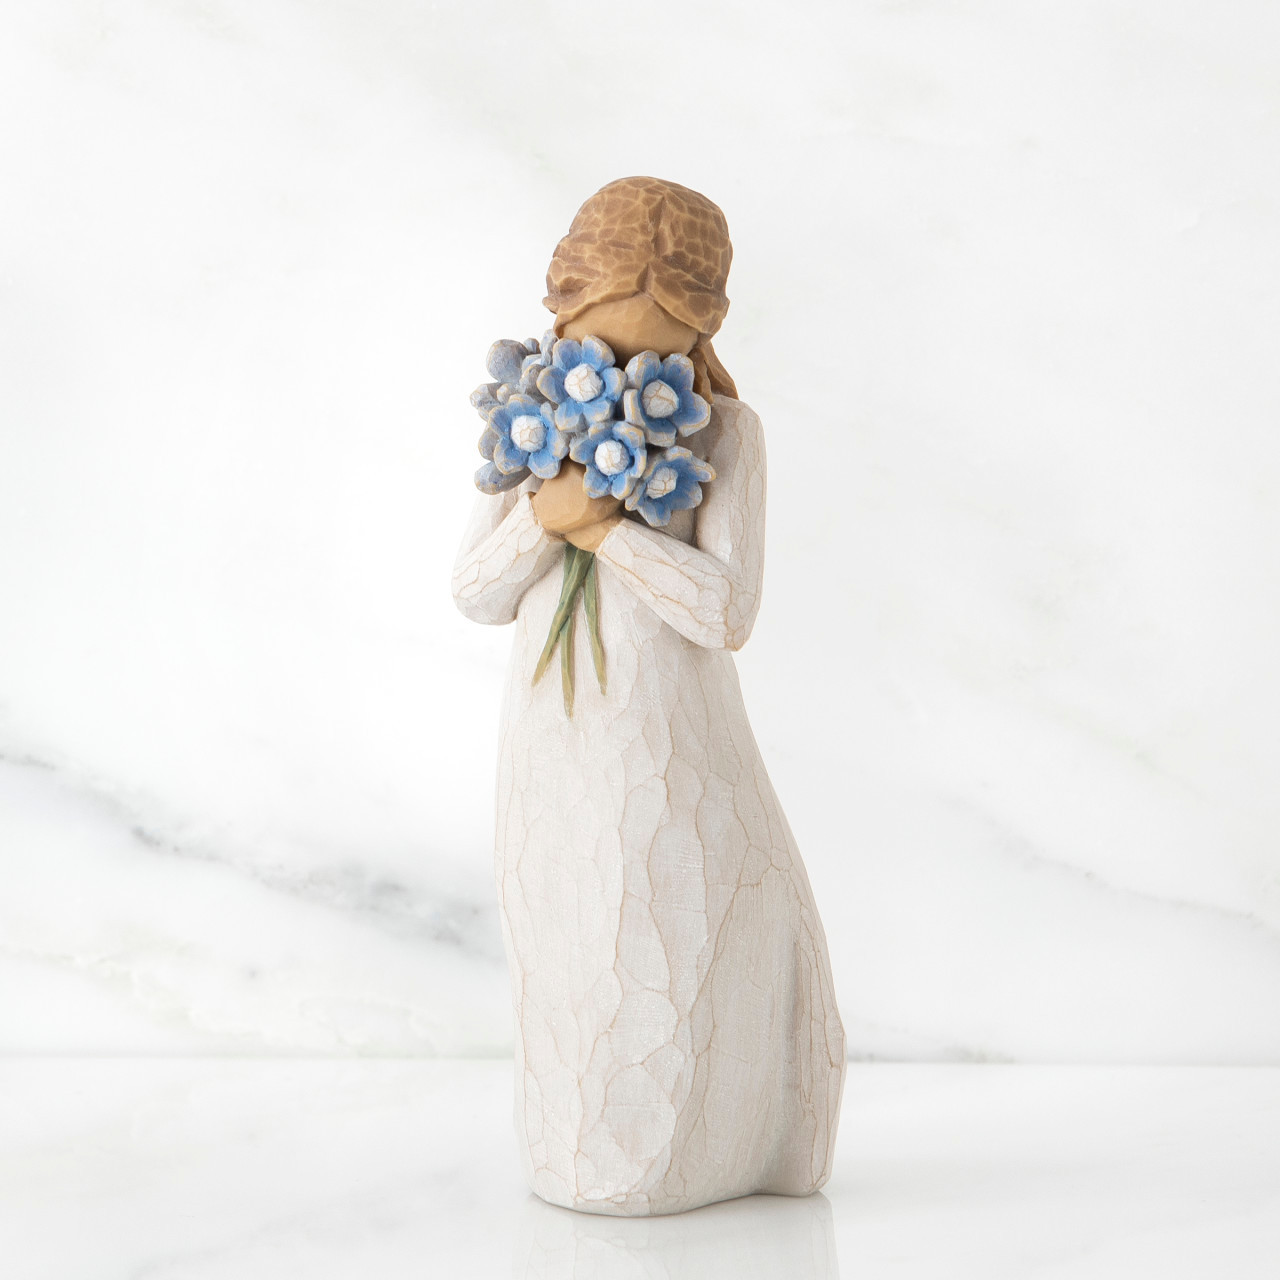 Forget-me-not, Hand Carving Sculpture